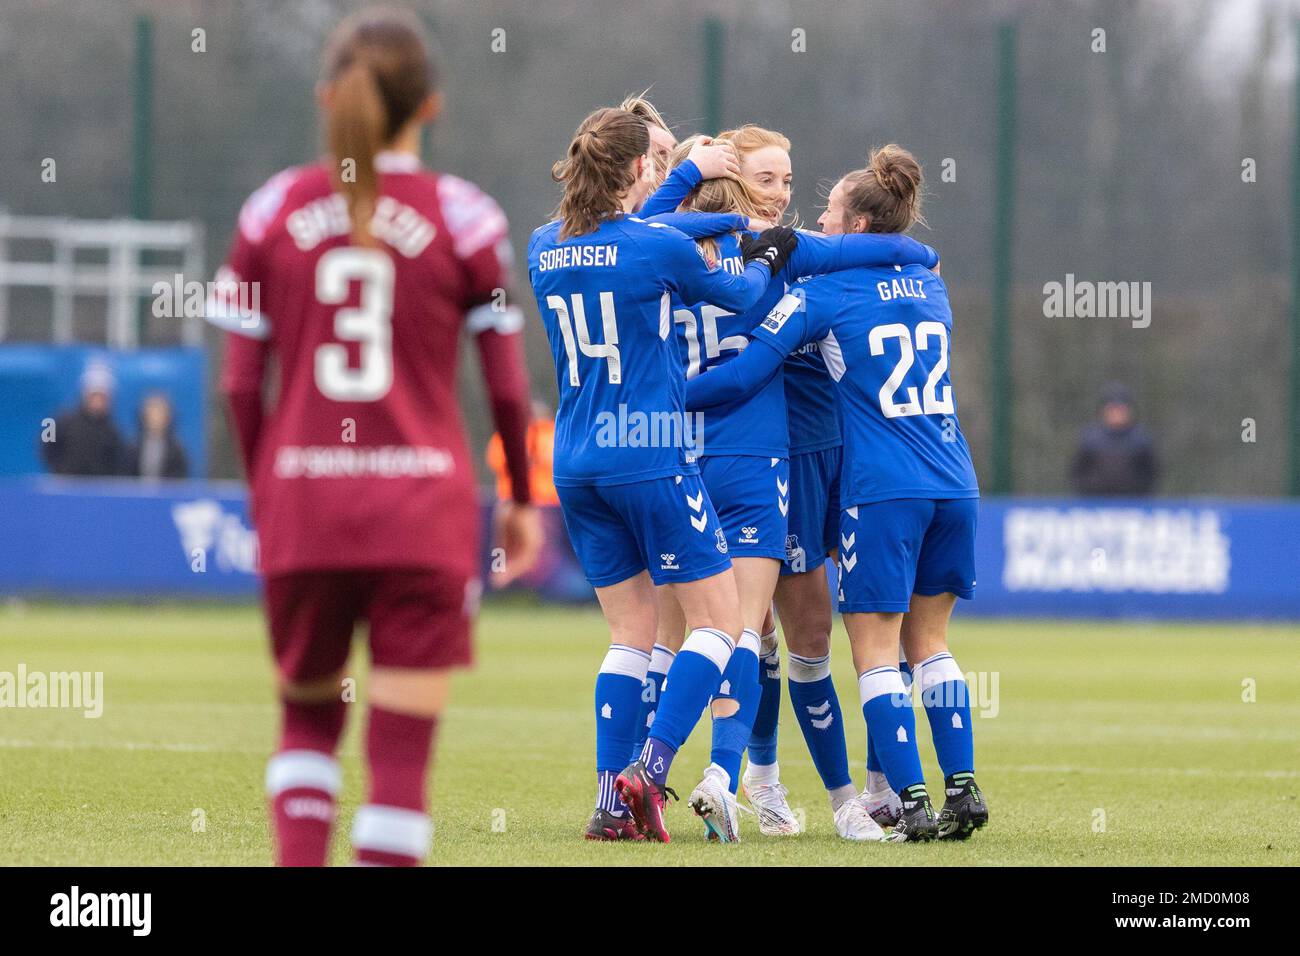 Liverpool, UK. 22nd Jan 2023. Agnes Beever-Jones of Everton Women celebrates her goal to make it 3-0 during the The Fa Women's Super League match between Everton Women and West Ham Women at Walton Hall Park, Liverpool, United Kingdom, 22nd January 2023  (Photo by Phil Bryan/Alamy Live News) Stock Photo